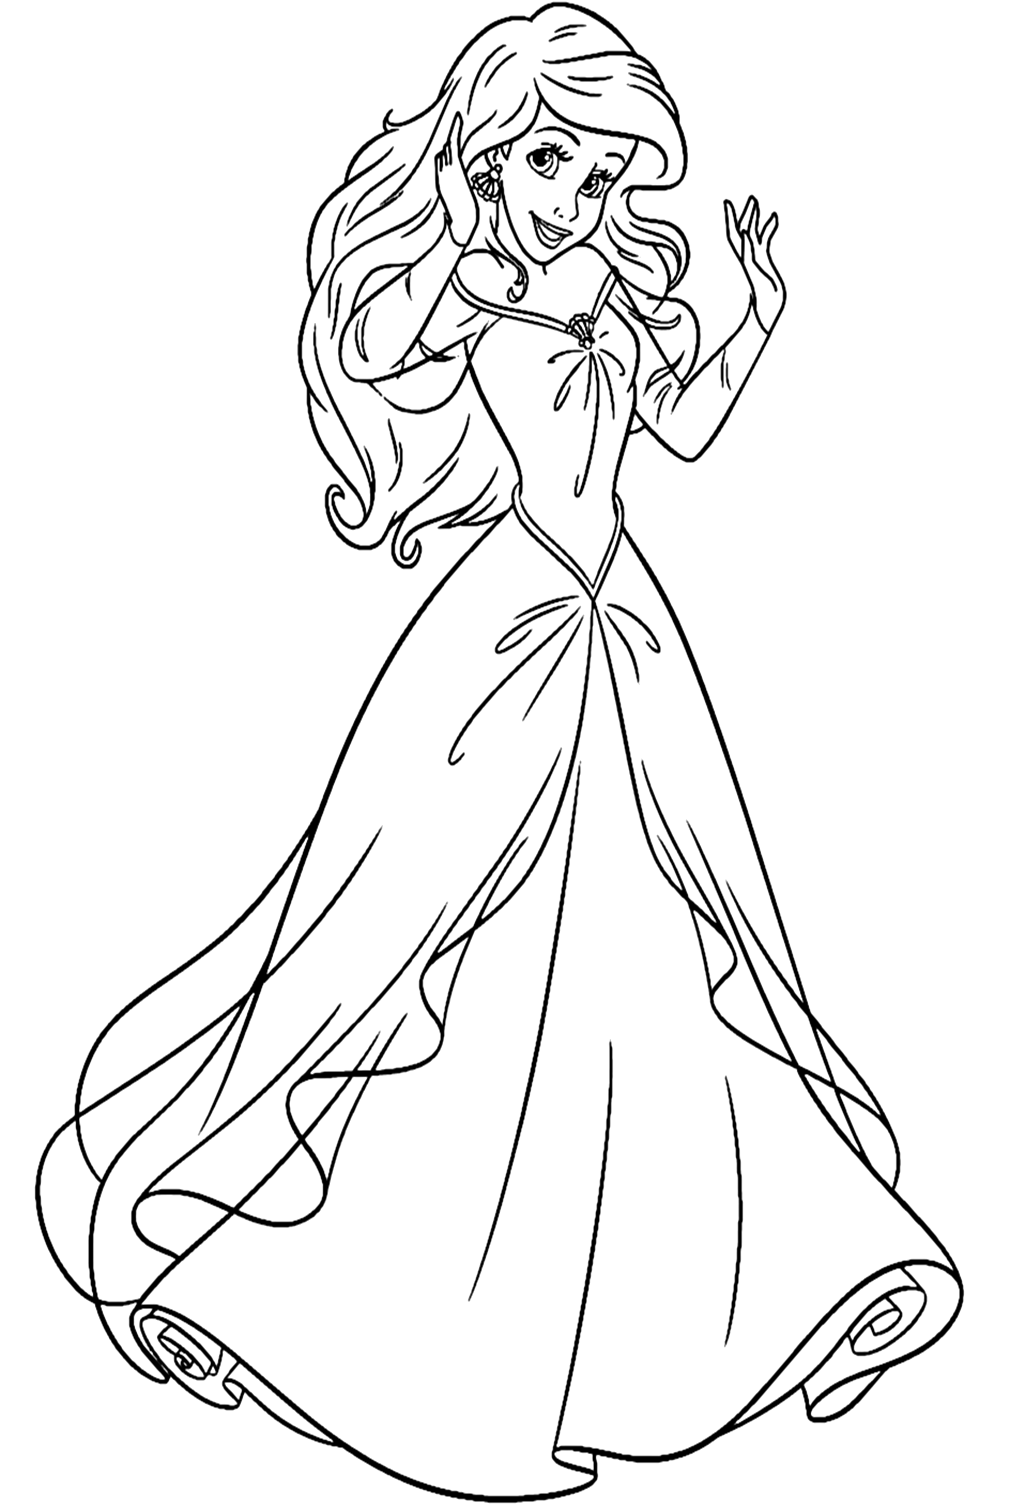 Ariel Wearing A Dress Coloring Pages